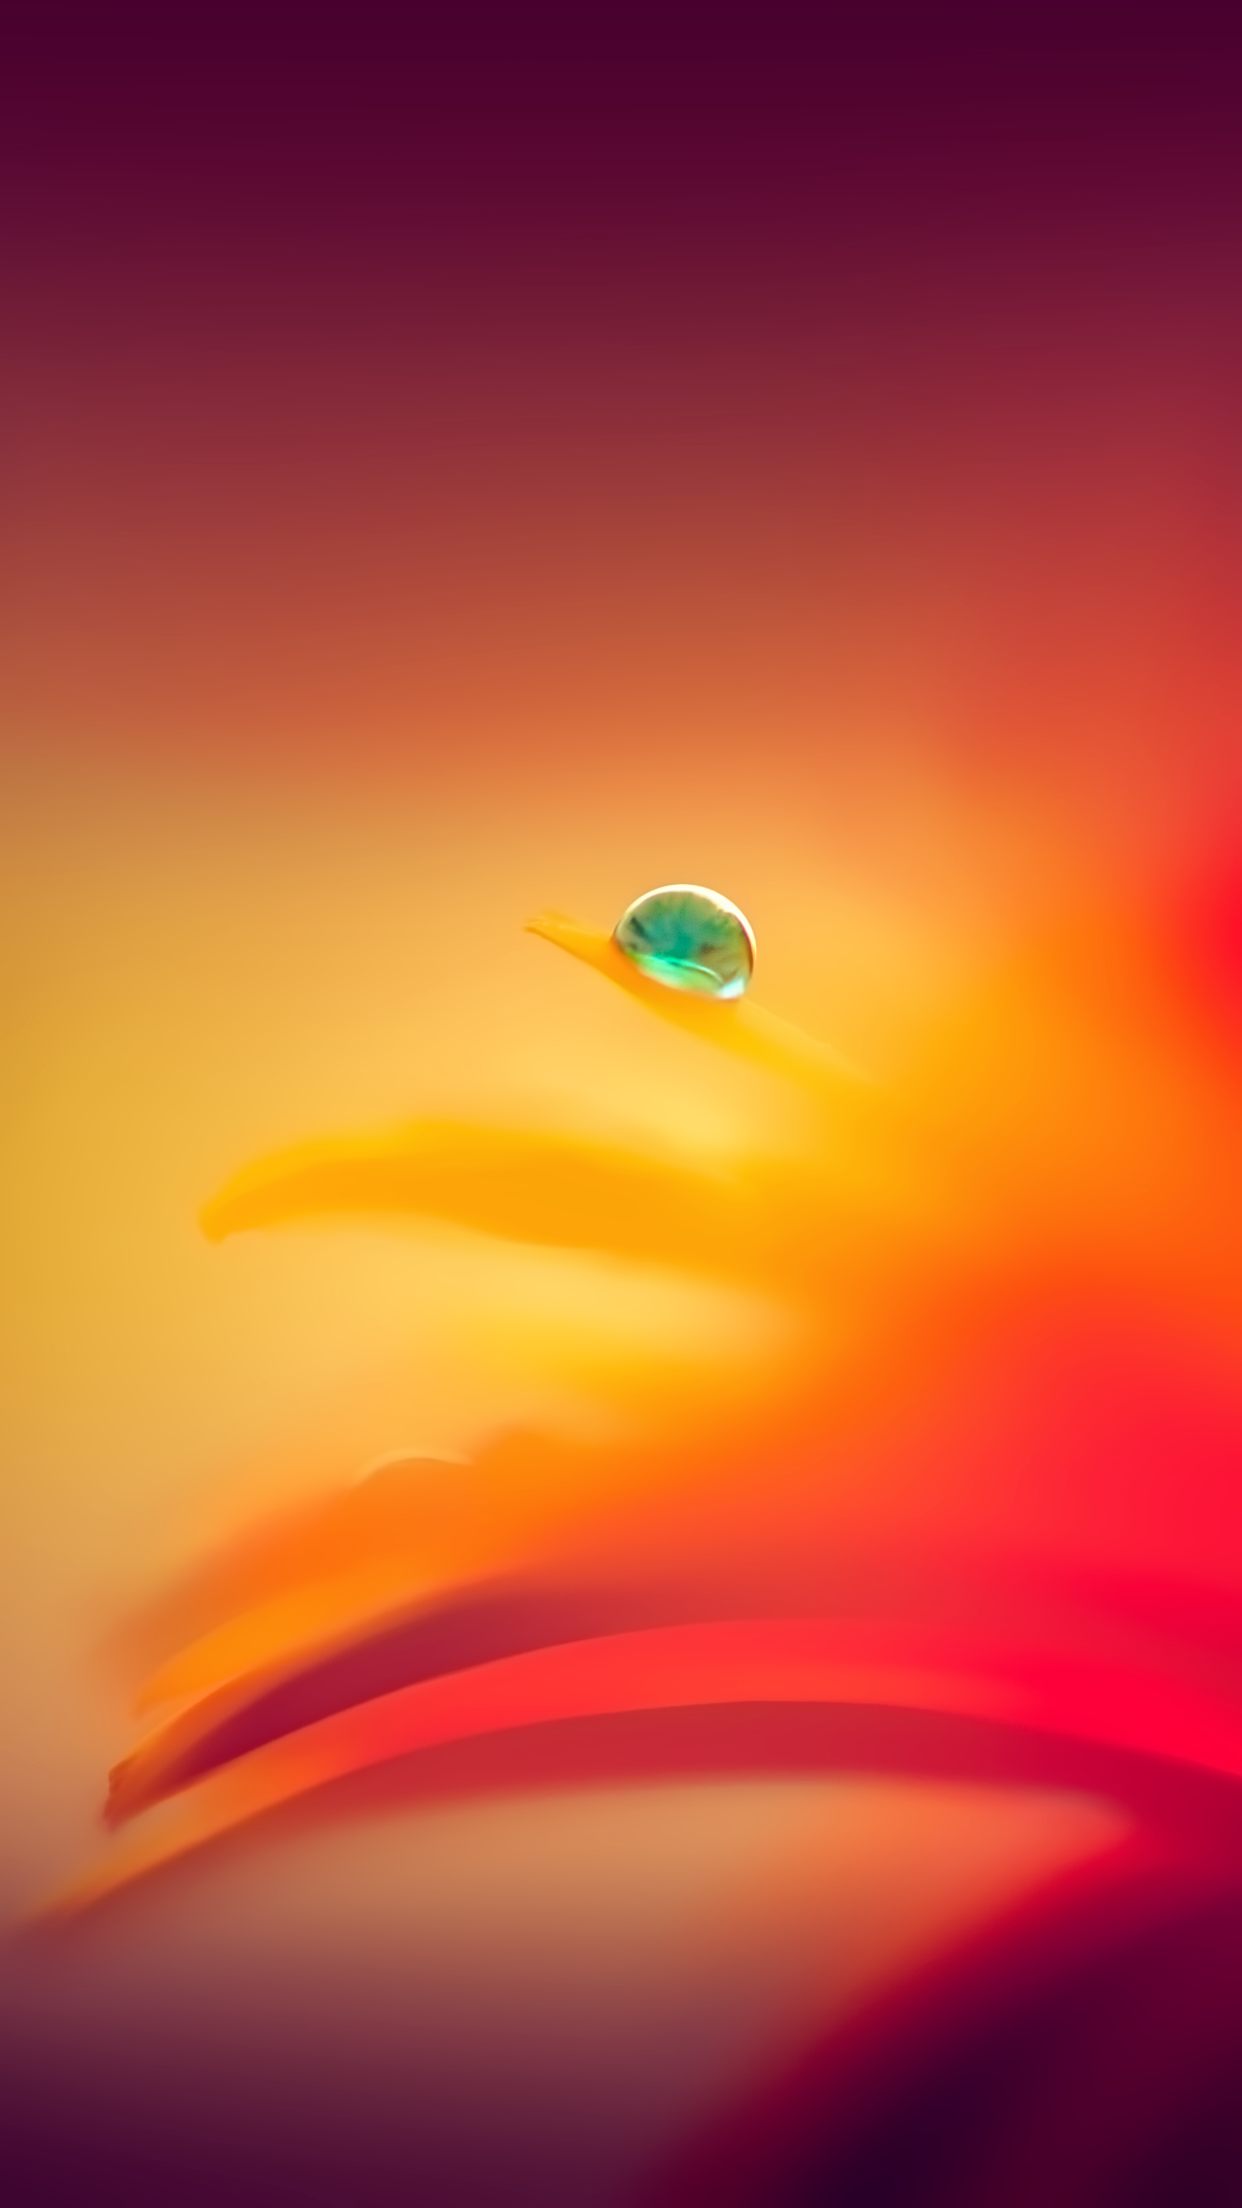 Wallpapers of the week: swirling color